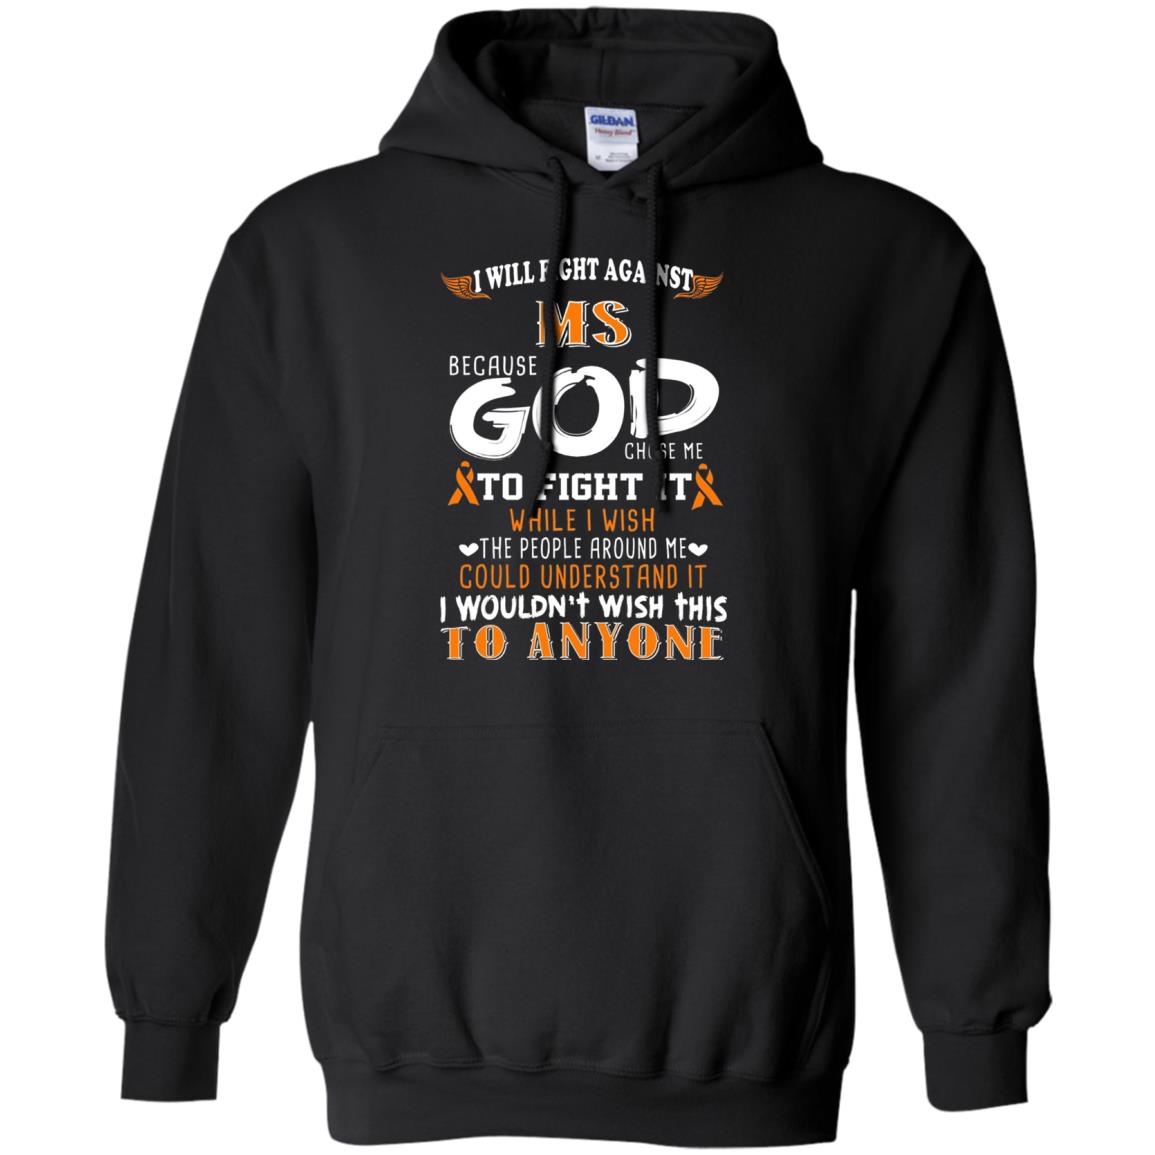 Multiple Sclerosis Awareness T-shirt I Will Fight Against Because God Chose Me